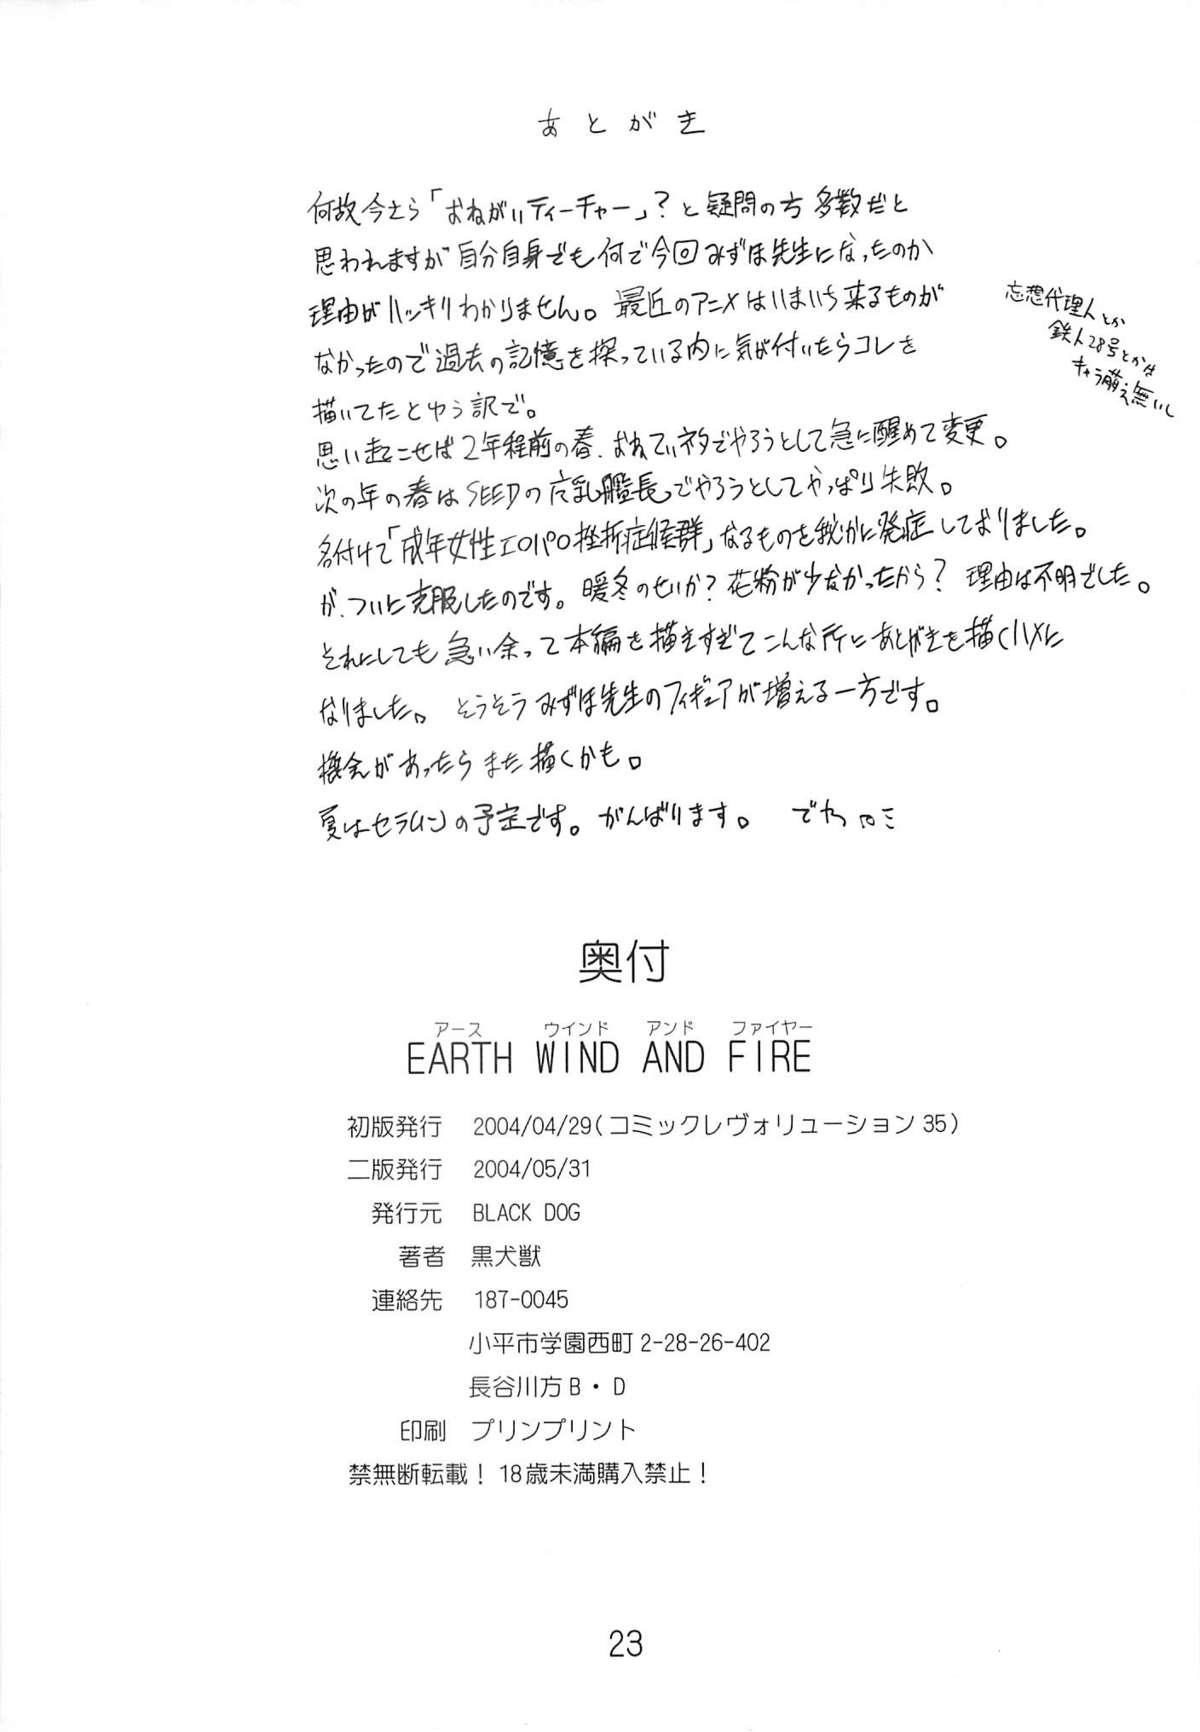 EARTH WIND AND FIRE 21